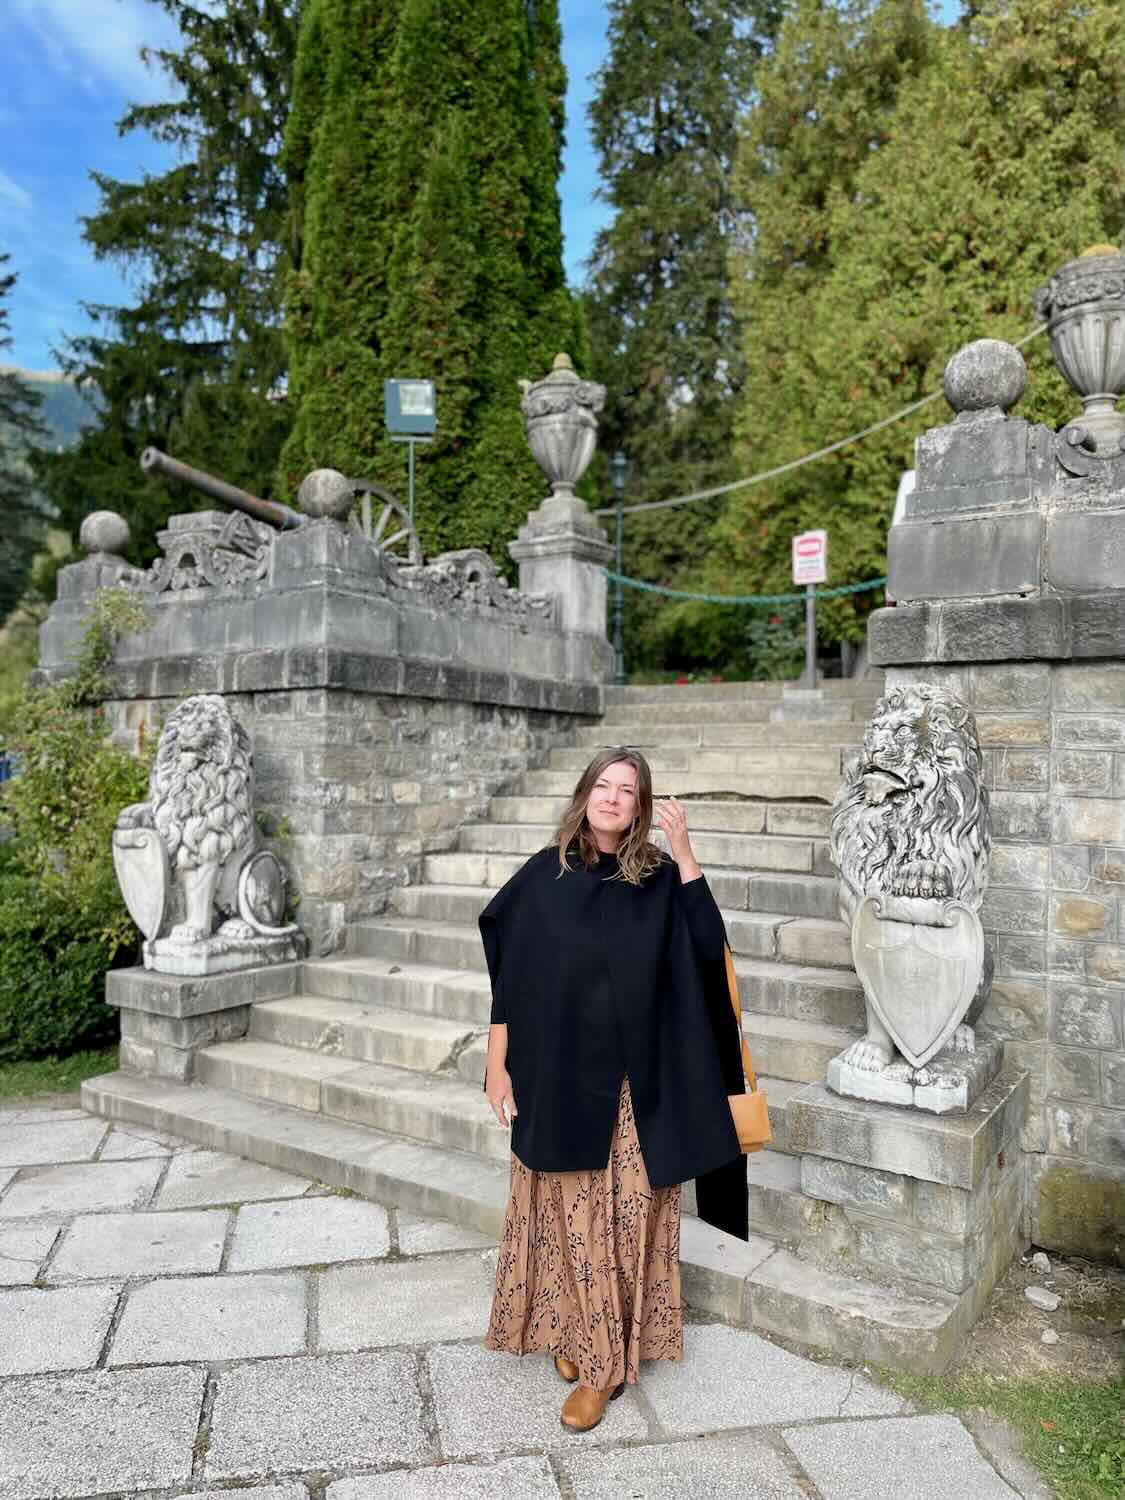 A woman in a flowing skirt and black cape stands at the ornate stone staircase entrance of Peles Castle, flanked by classical statues and vibrant green foliage.